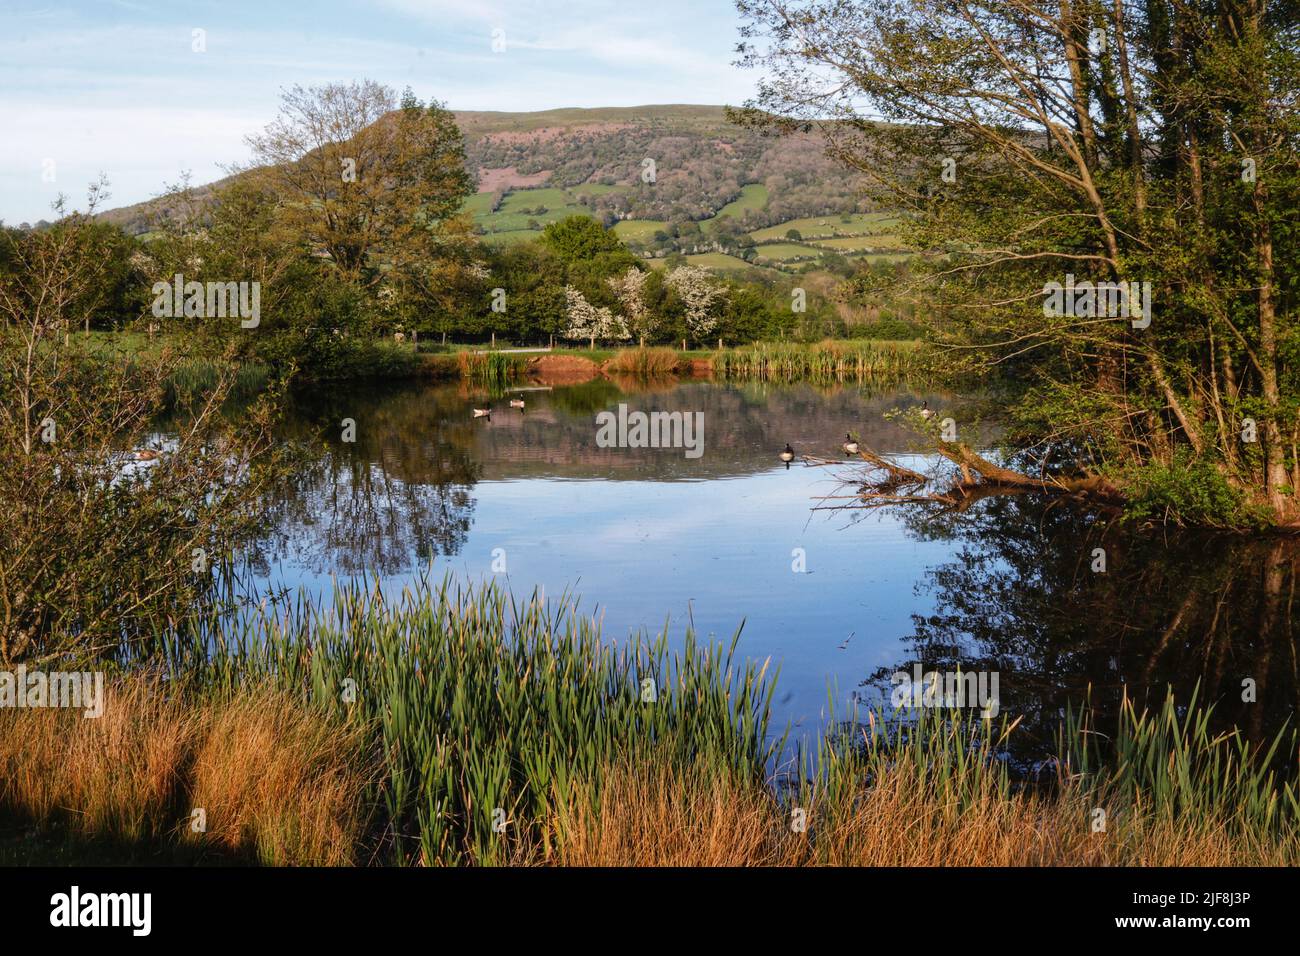 The outline of The Skirrid Mountain, or Ysgyryd Fawr in Welsh reflected from the surface of a calm pond Stock Photo